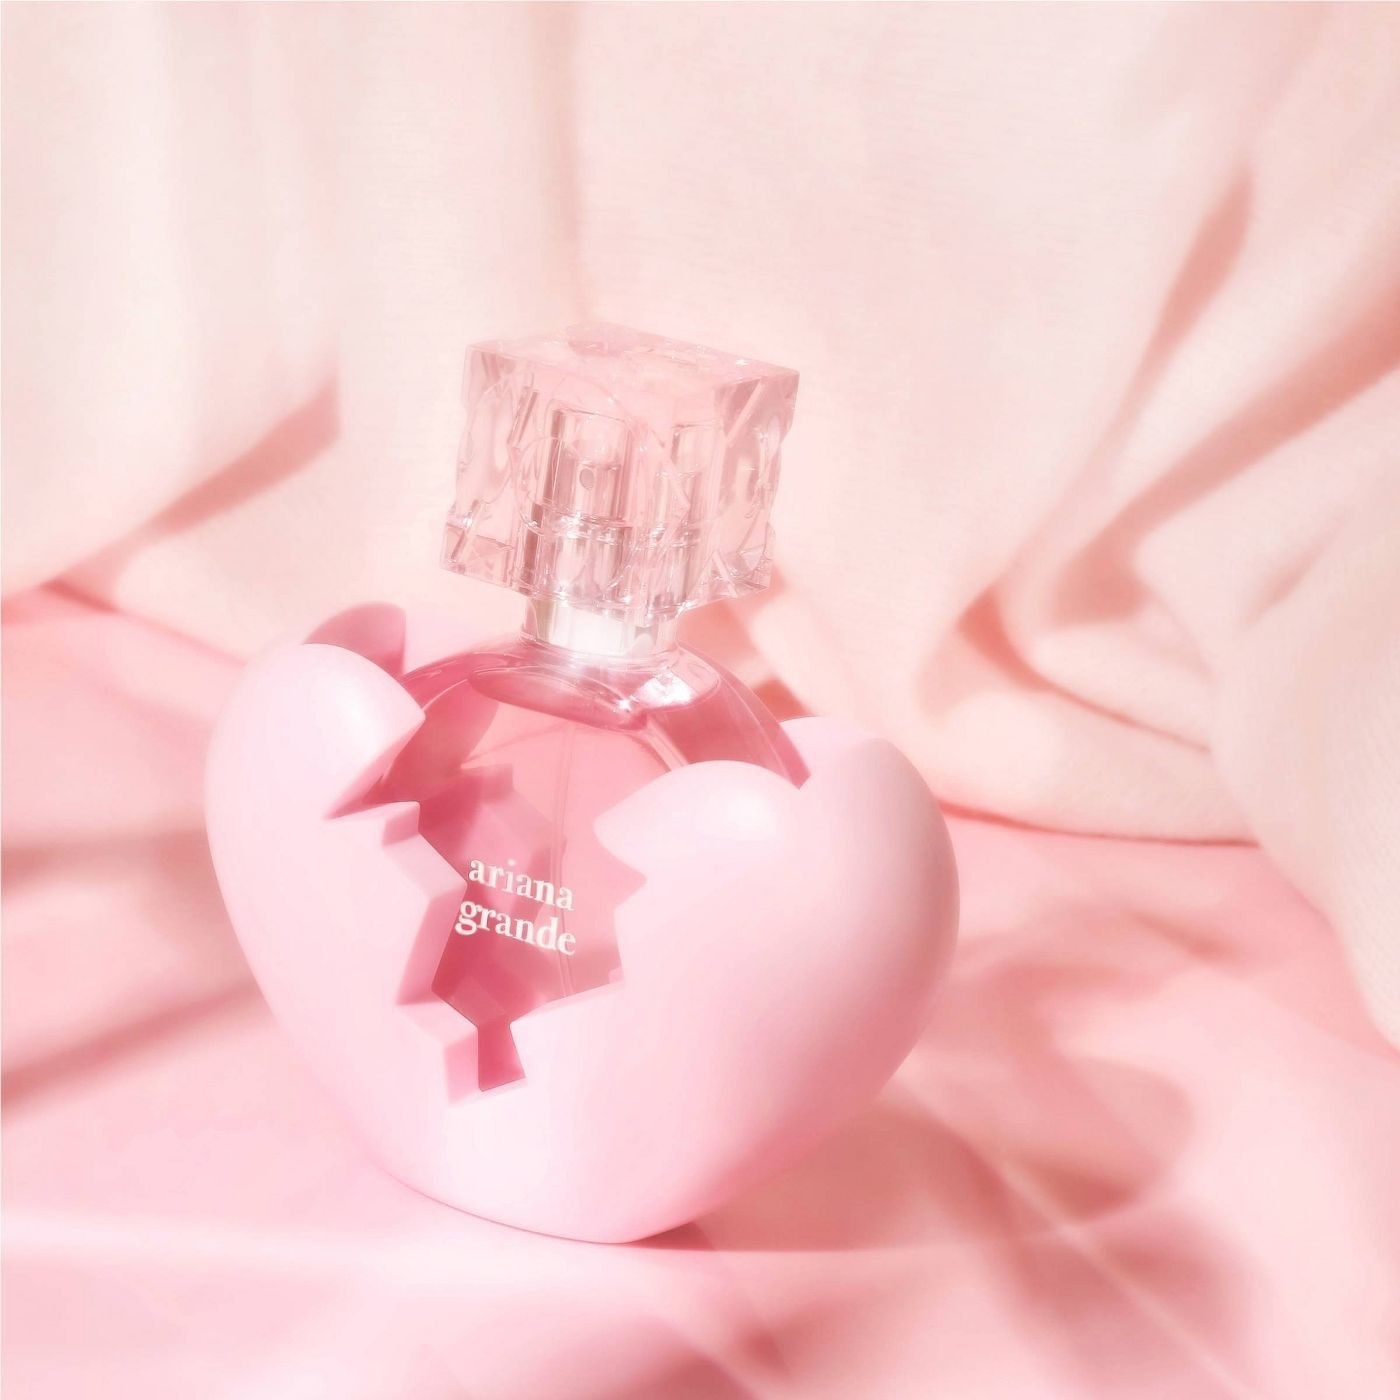 A pink bottle of perfume